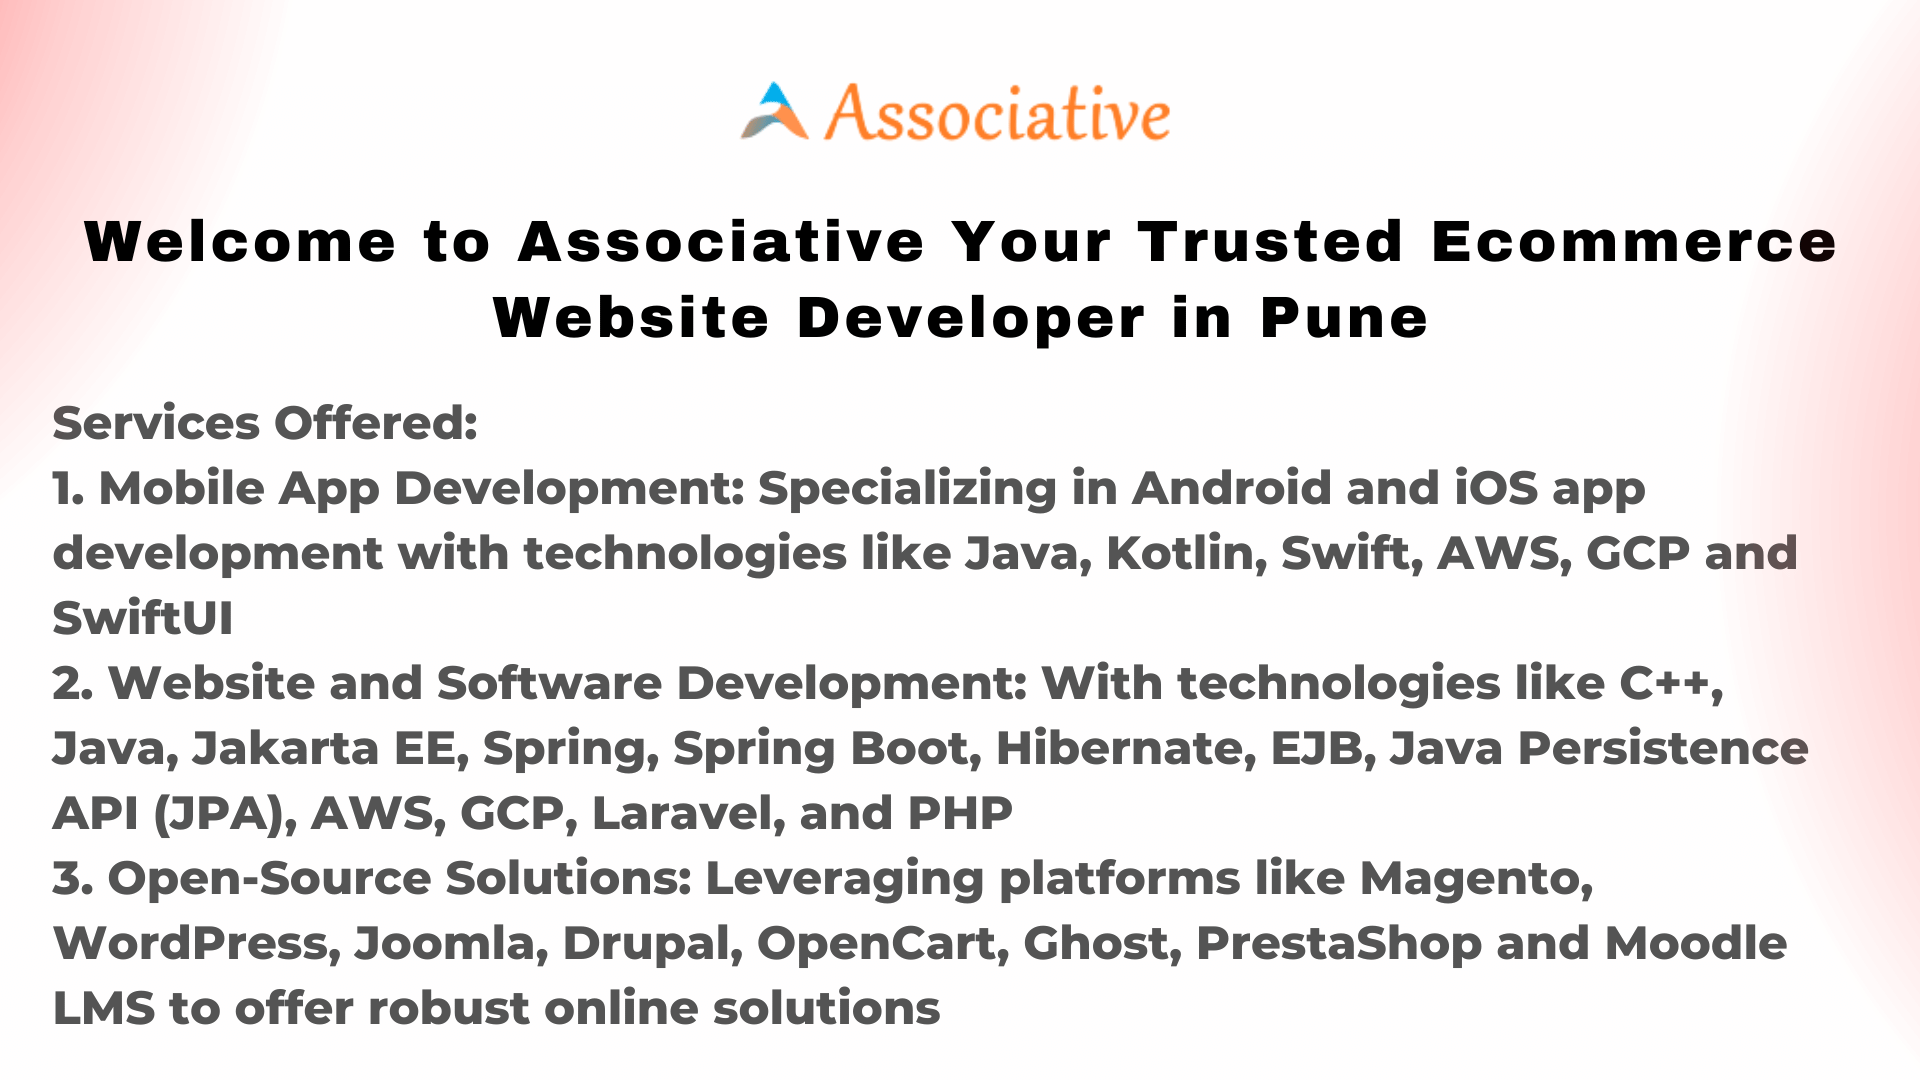 Welcome to Associative Your Trusted Ecommerce Website Developer in Pune